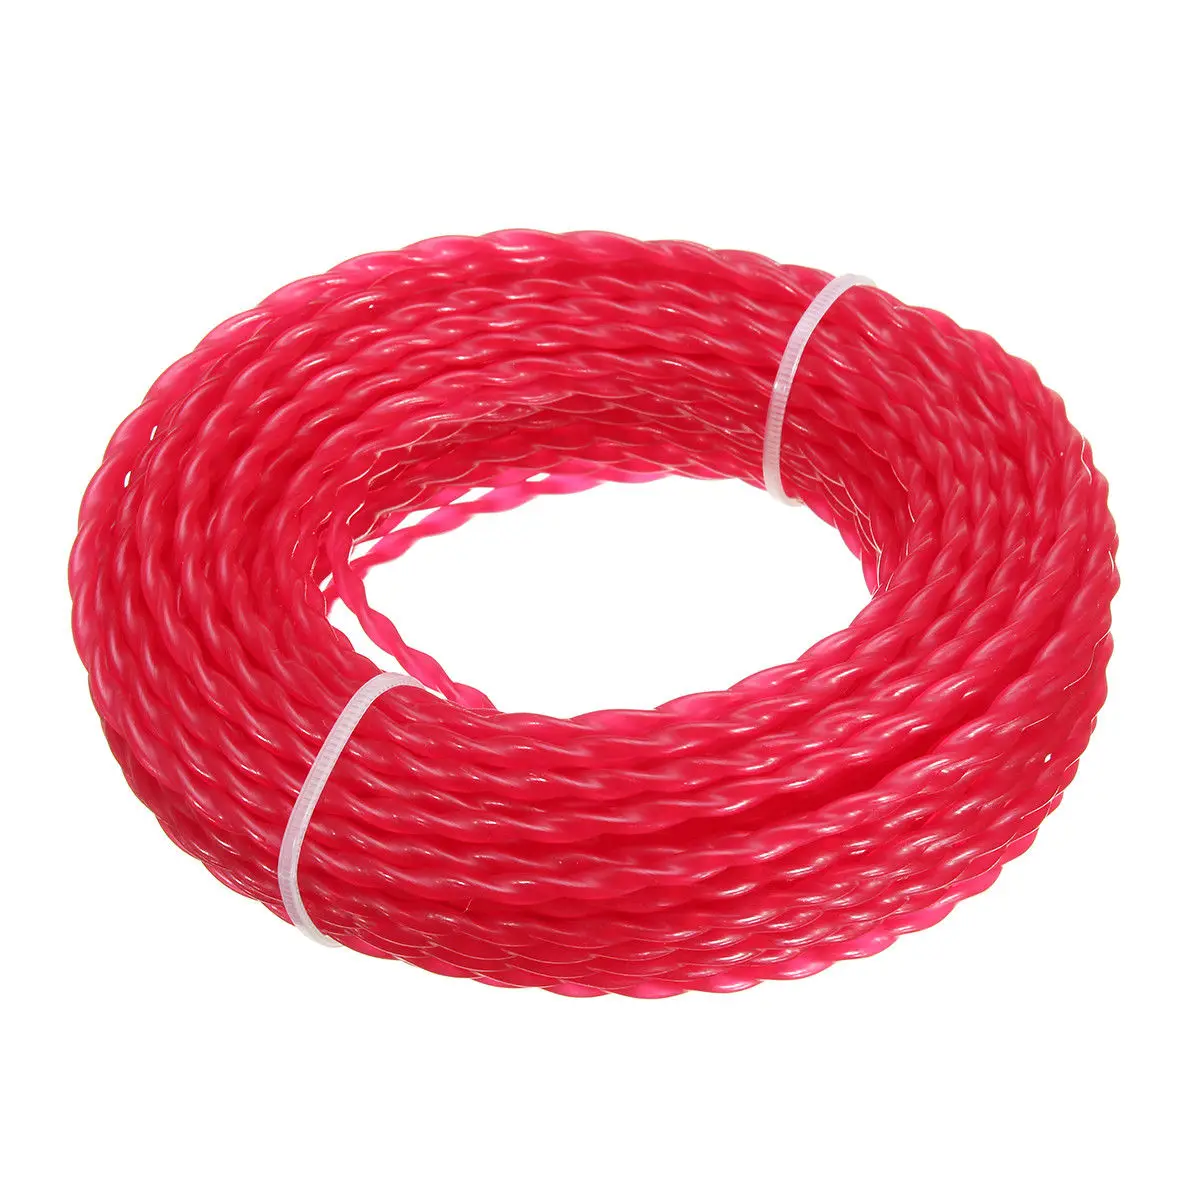 Trimmer Line Nylon 15m 3mm Rope Roll Cord Wire String Grass Strimmer Lawn Mower Electric Brush Cutters Parts Garden Power Tools